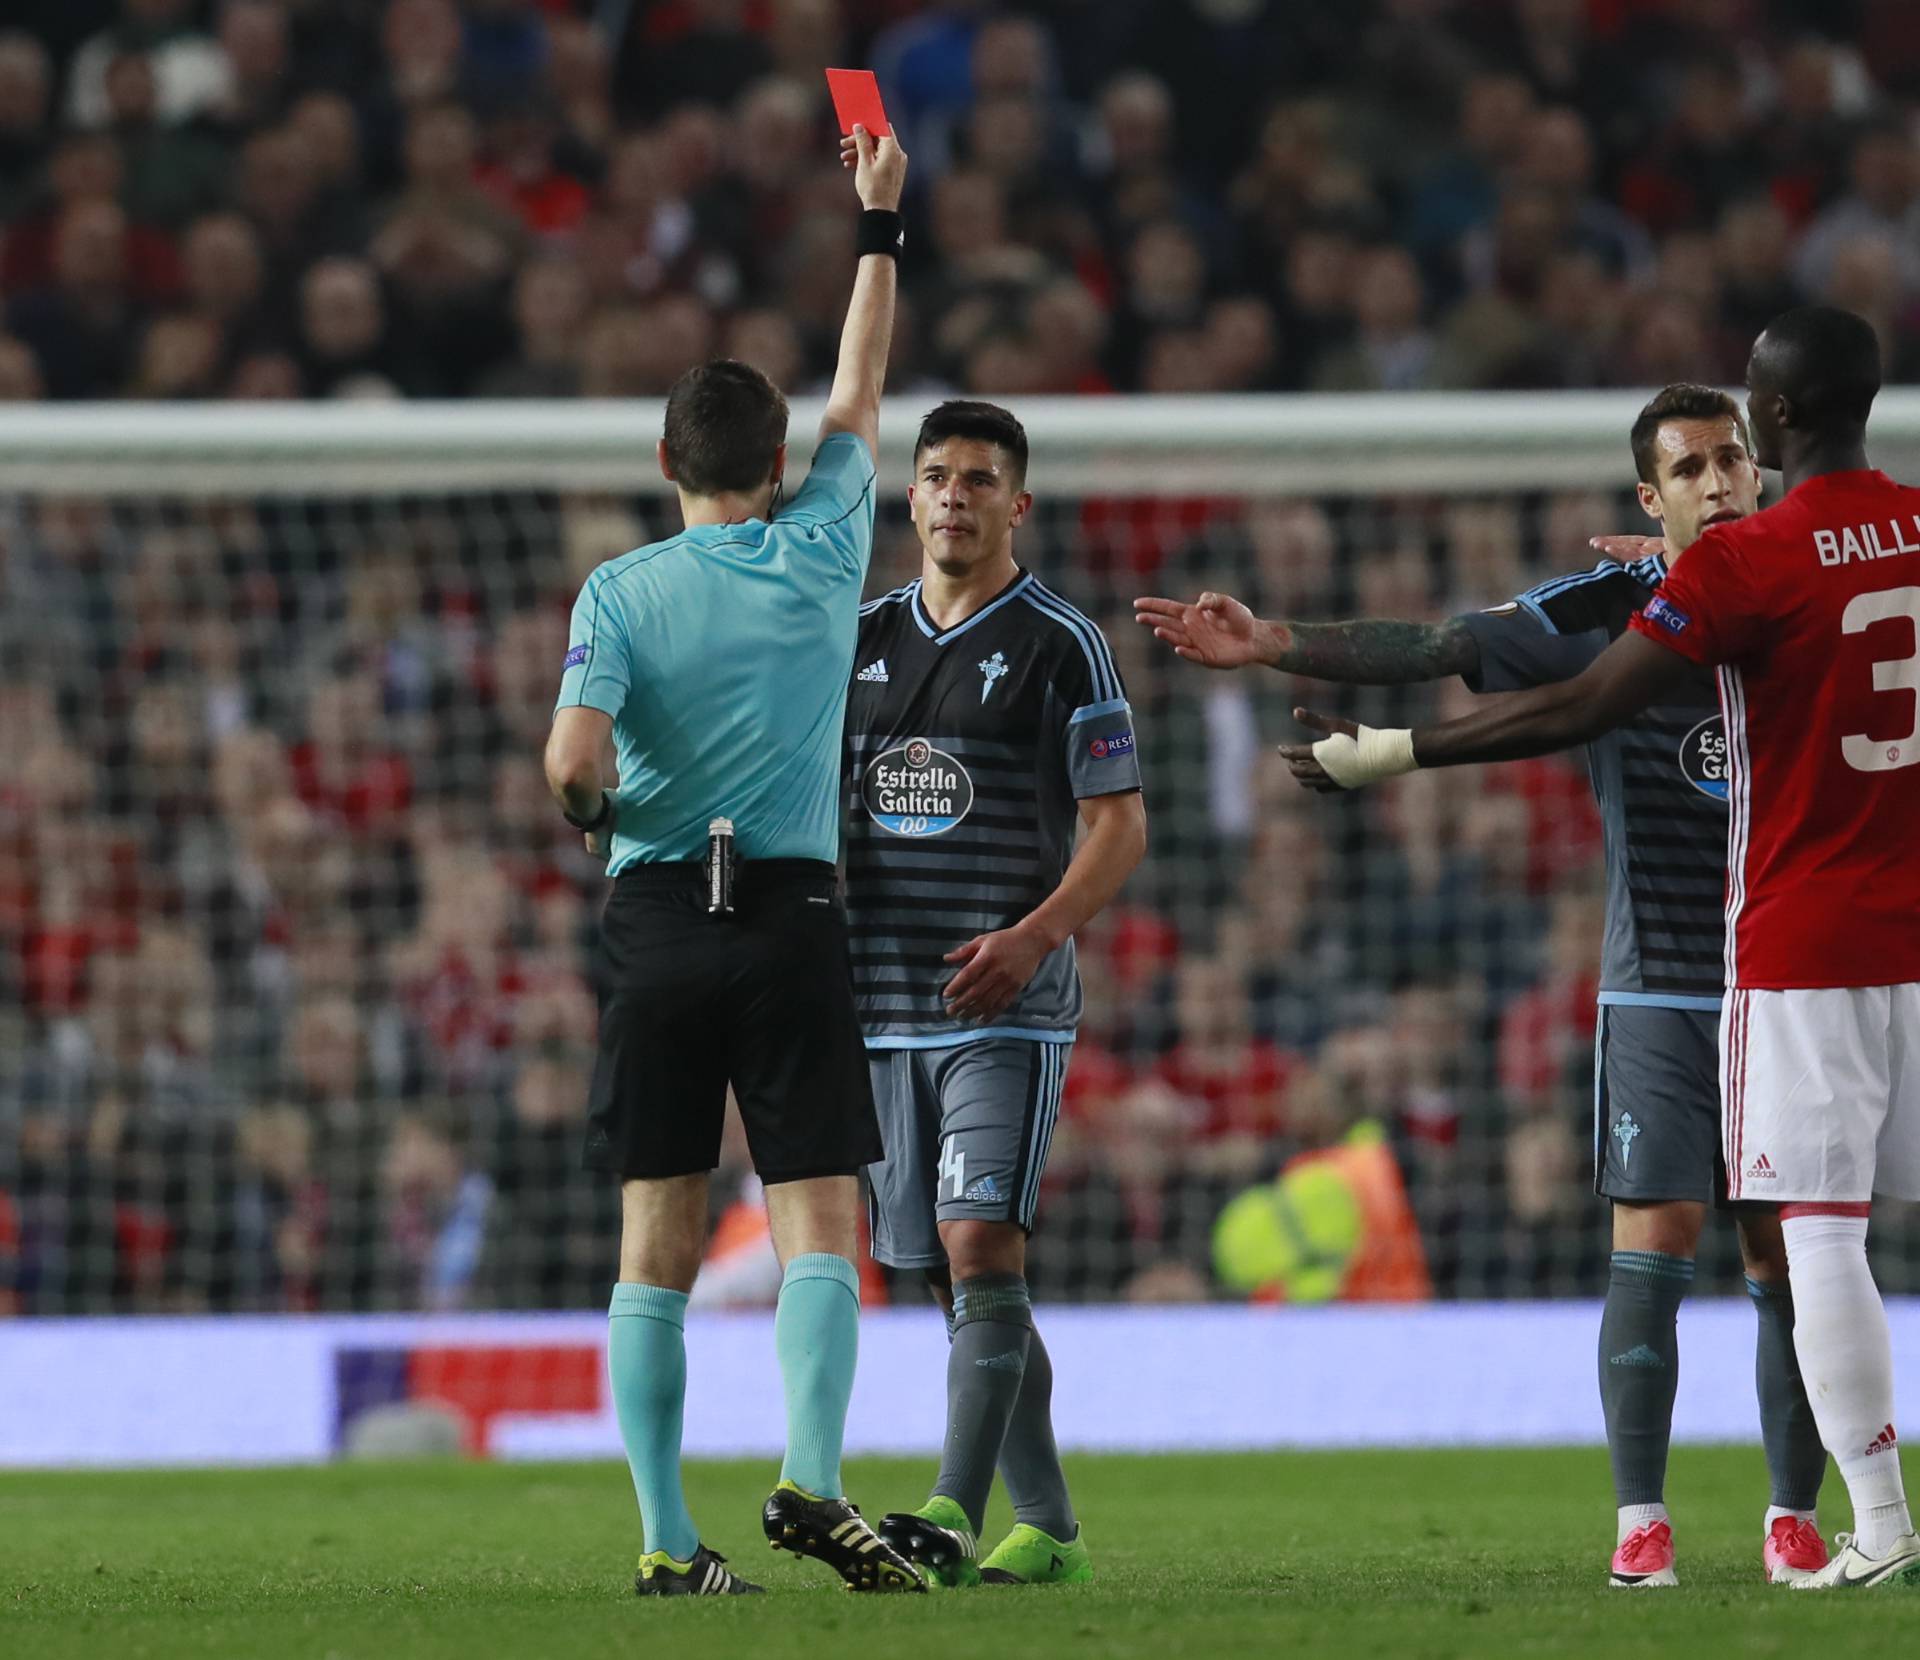 Manchester United's Eric Bailly and Celta Vigo's Facundo Roncaglia are both shown red cards by referee Ovidiu Hategan